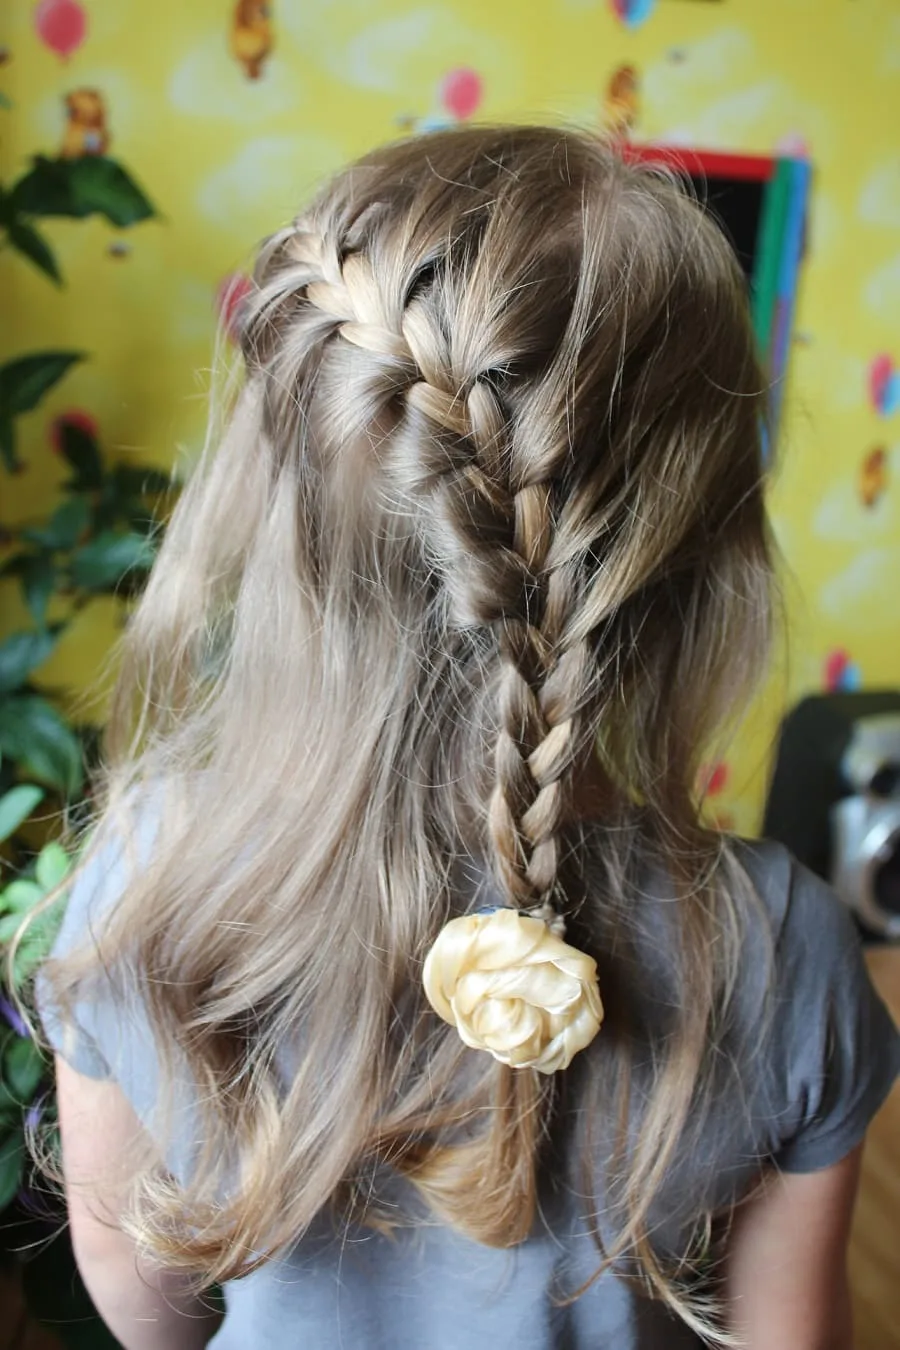 braid hairstyles for 10 year old girl